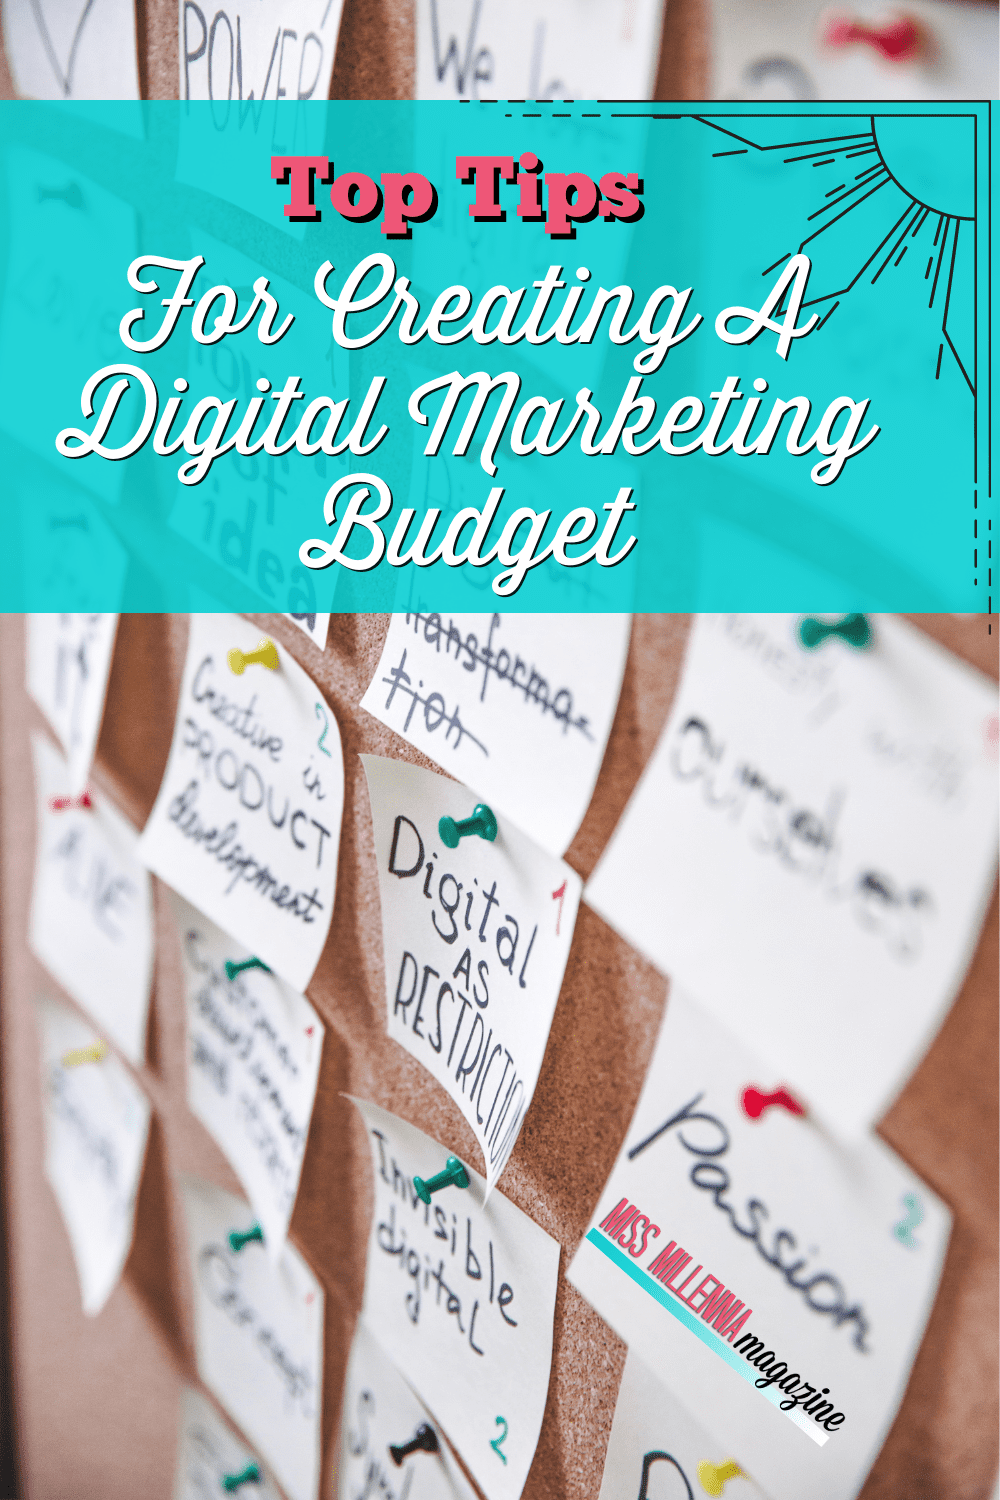 Top Tips For Creating A Digital Marketing Budget